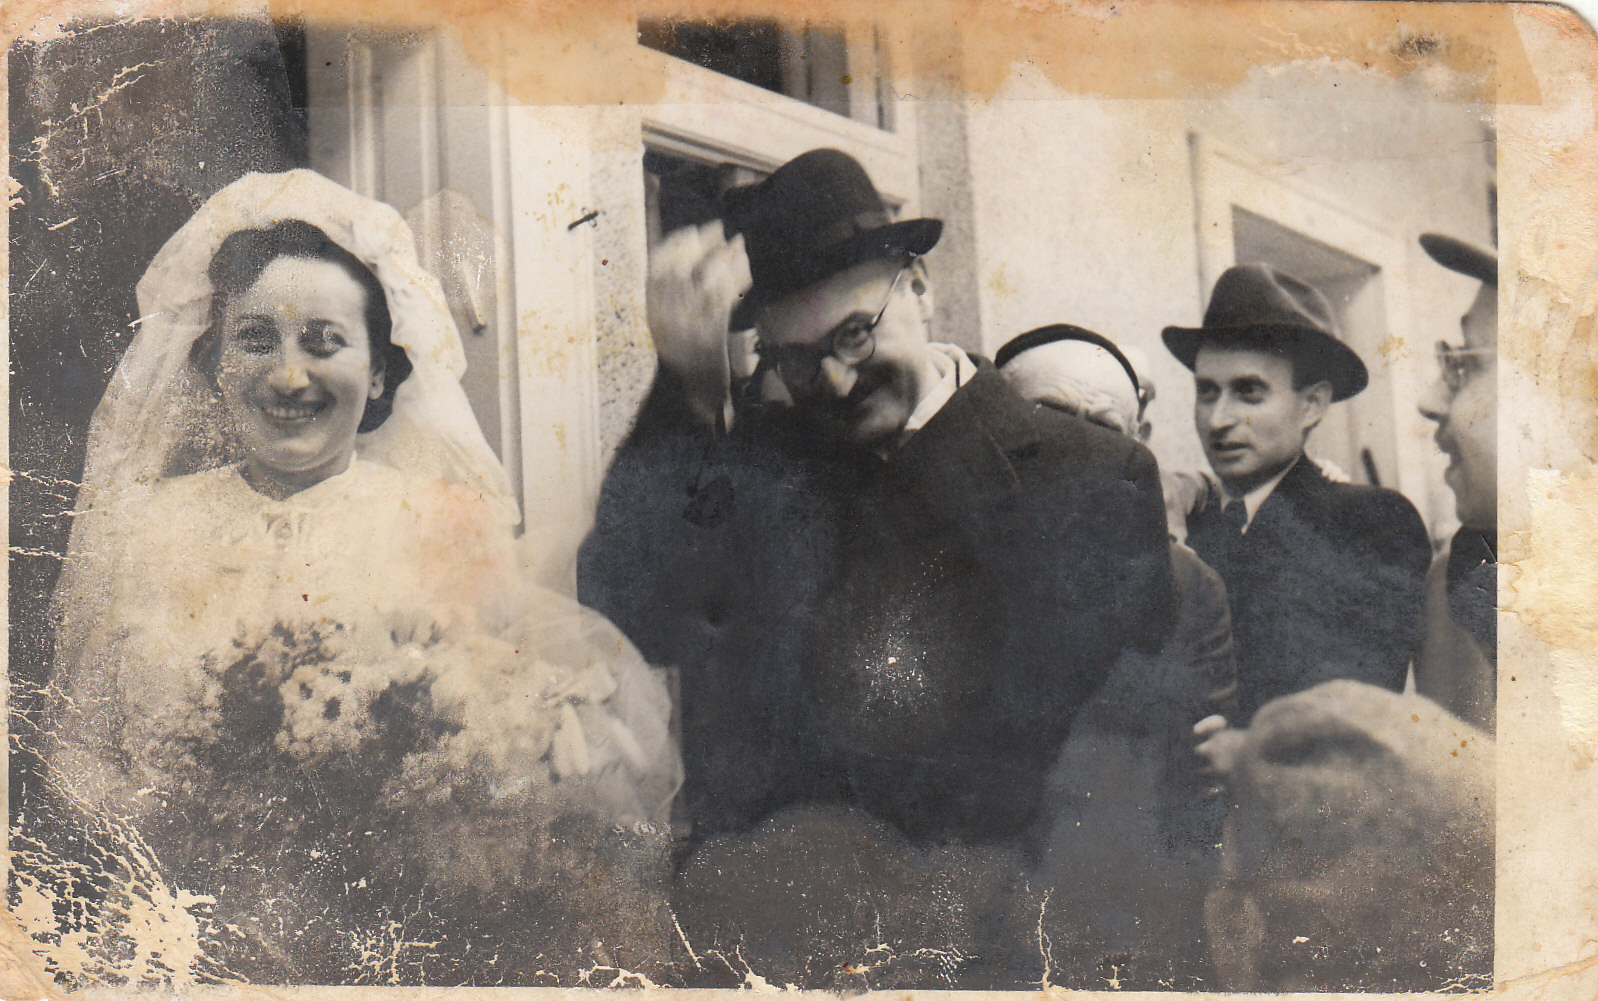 Miriam Grab’s parents, Eugen and Jolan Friedmann, on their wedding day in 1940, in Tapozcany, Czechoslovakia. (Courtesy of Miriam Grab)